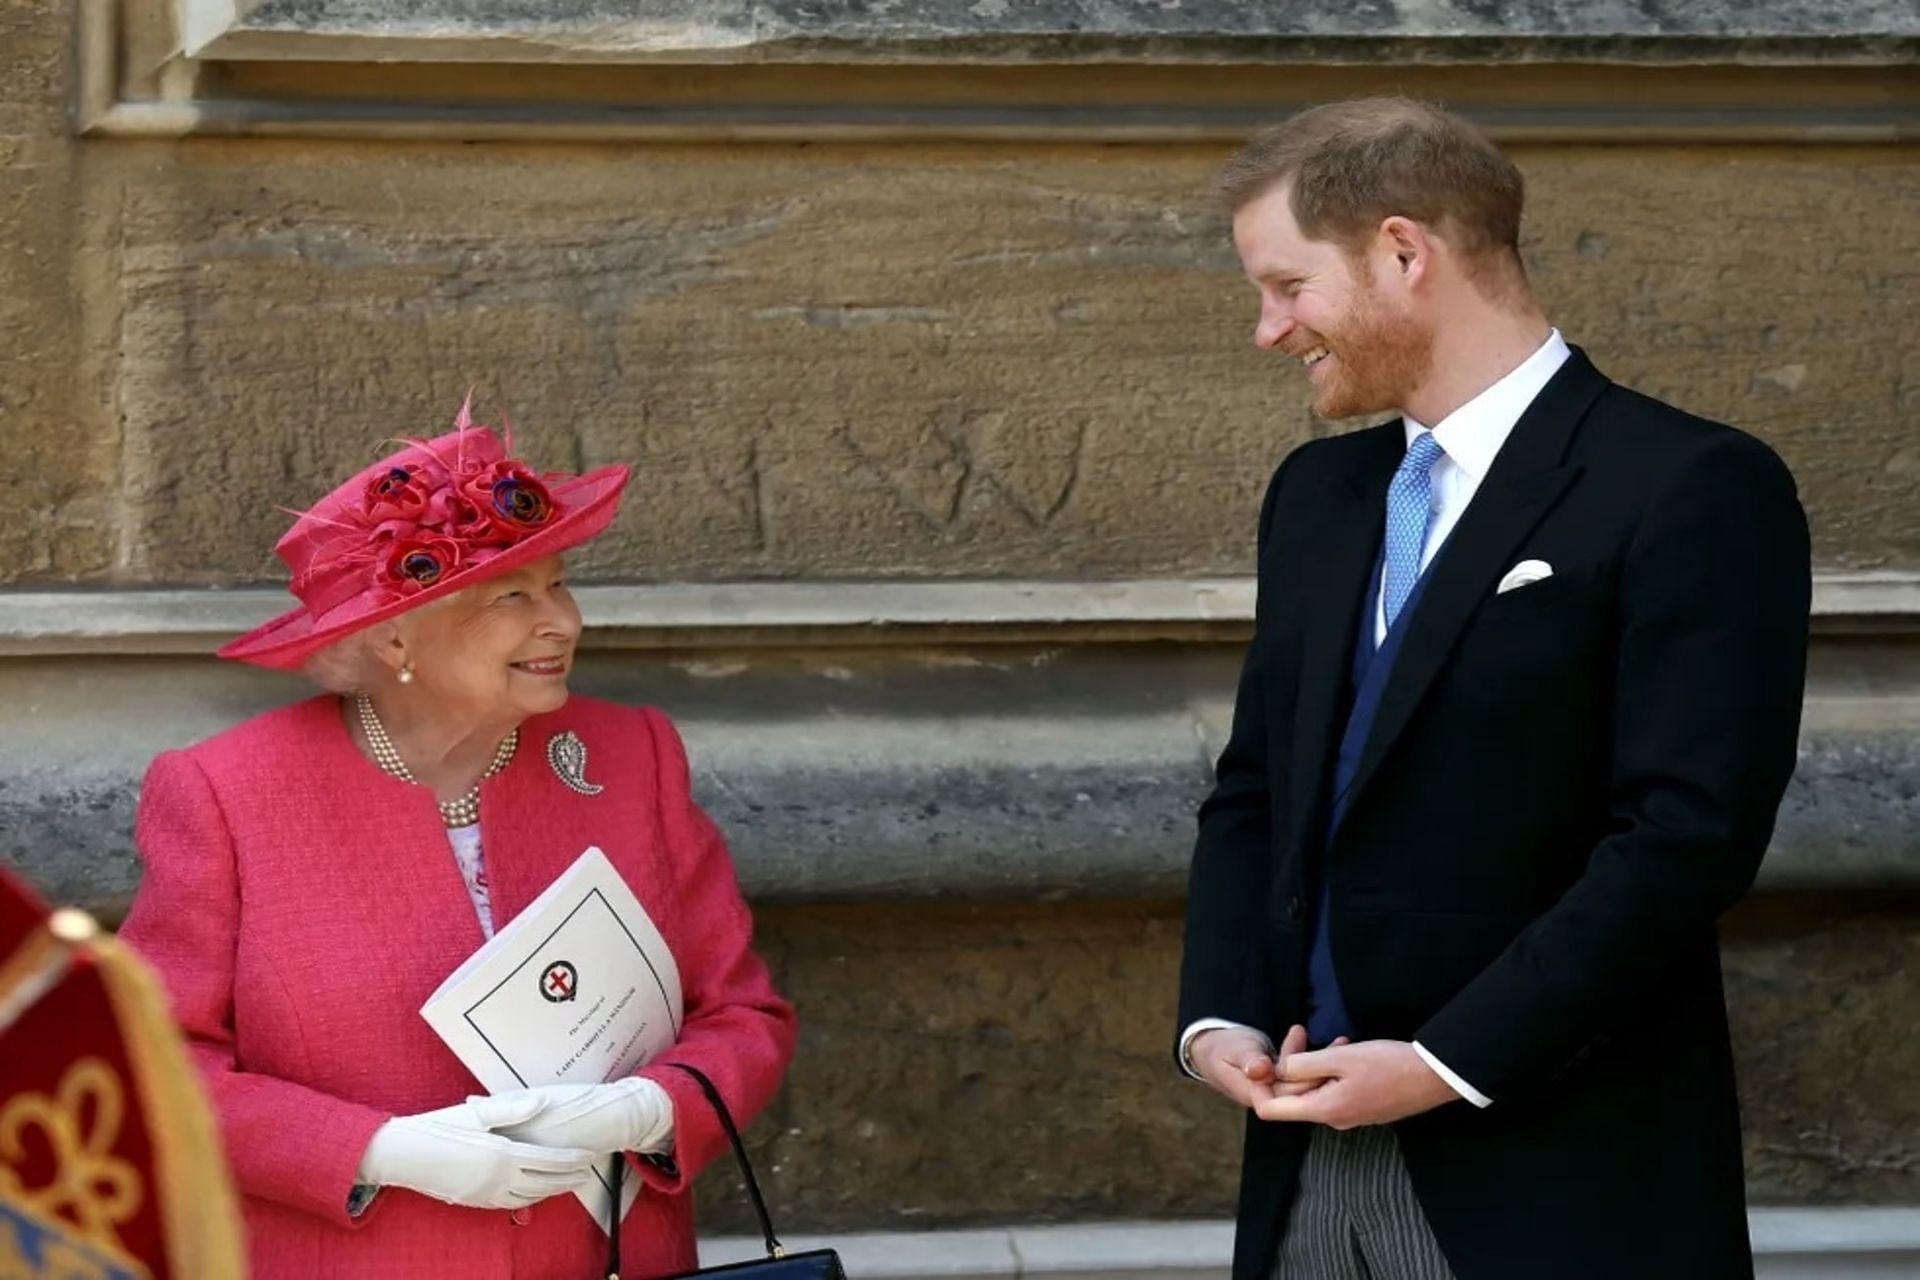 Queen Elizabeth II and Prince Harry (Image via WPA Pool/Getty Images)